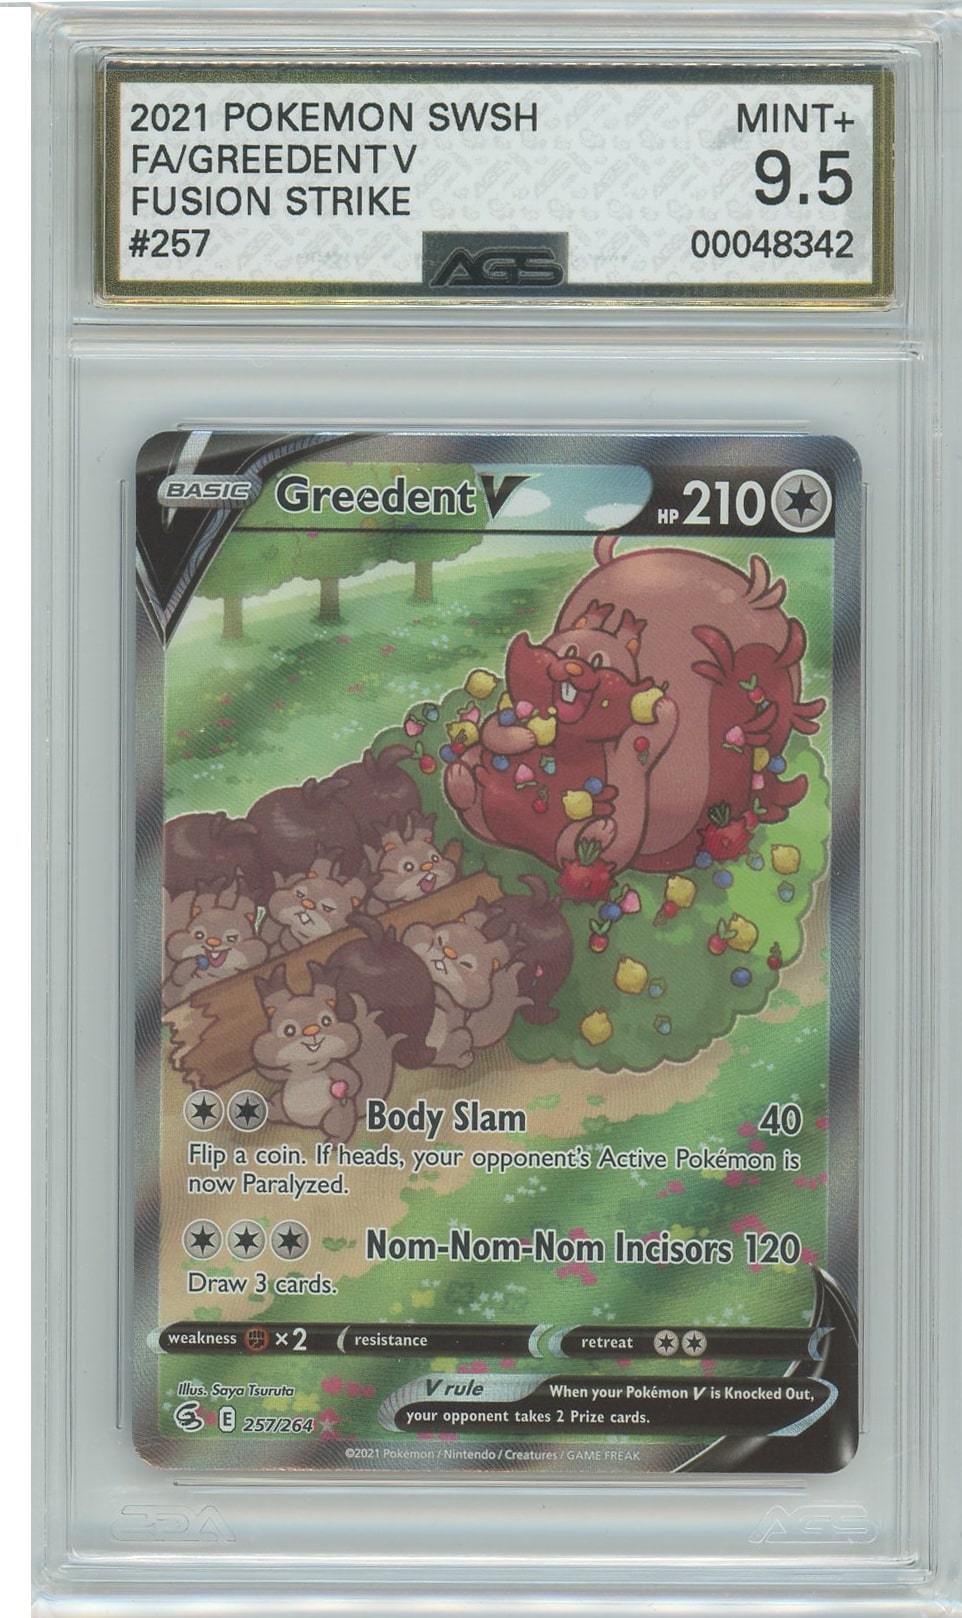 AGS (MINT+ 9.5) Greedent V #257 - Fusion Strike (#00048342)